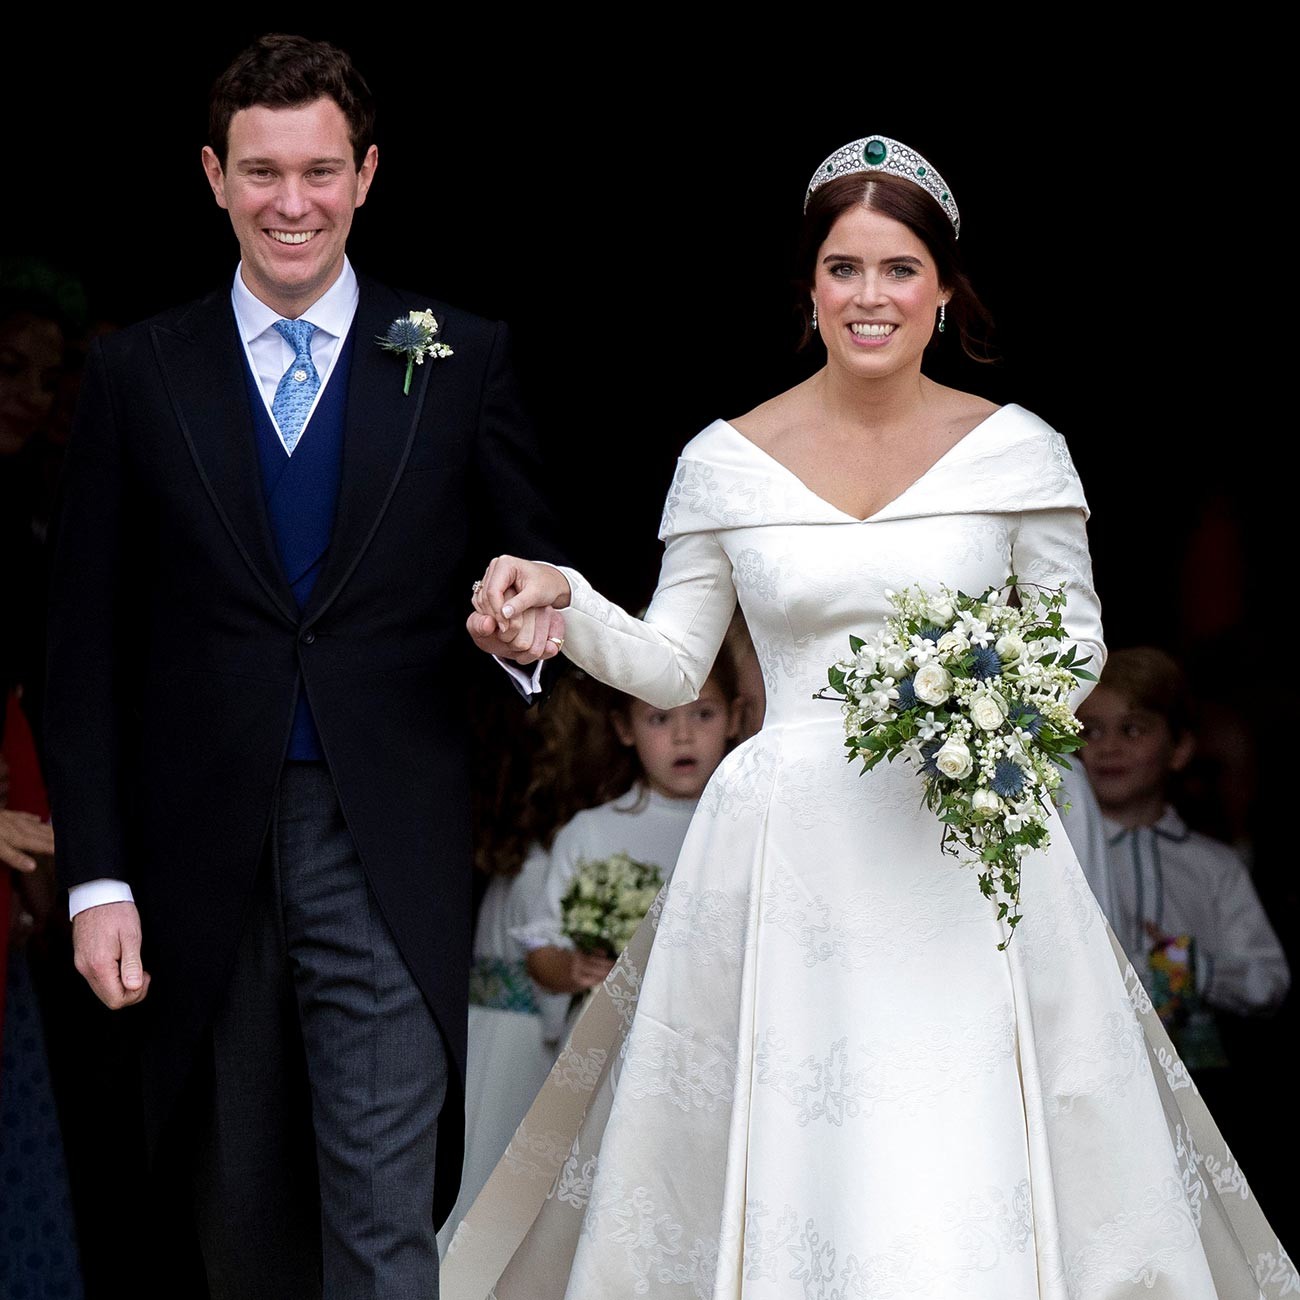 Princess Eugenie and Jack Brooksbank leave St George's Chapel in Windsor Castle following their wedding in 2018.